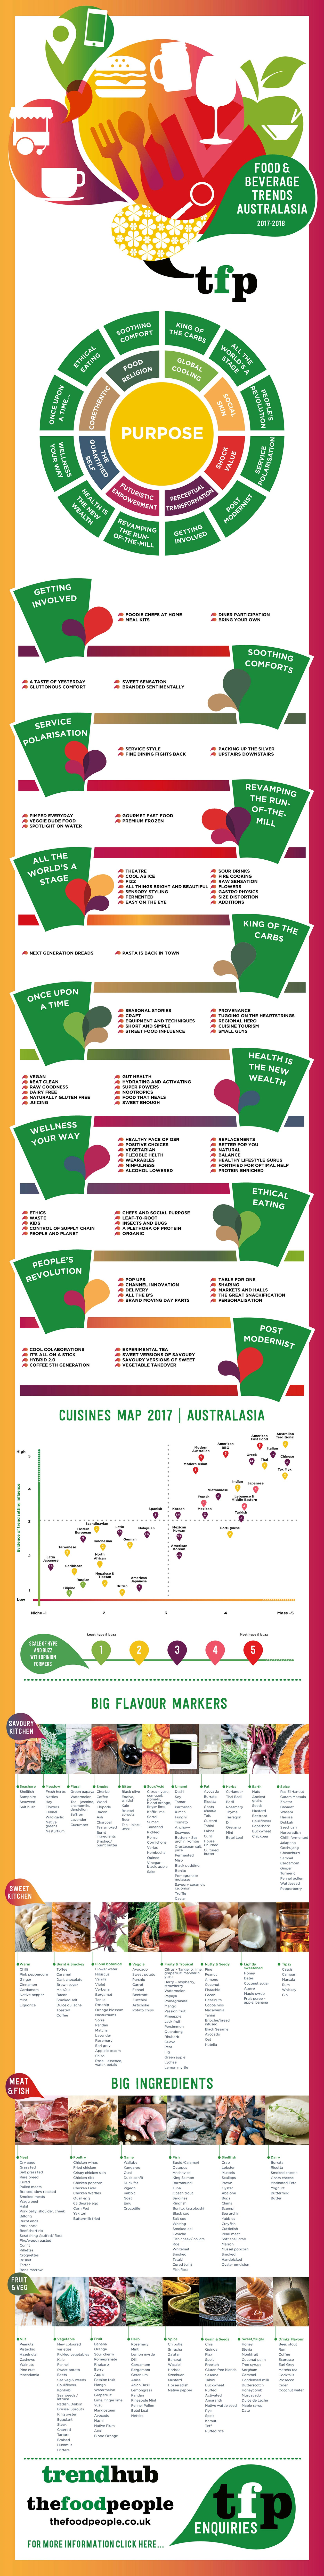 Food and Beverage Trends 2017 - Australasia